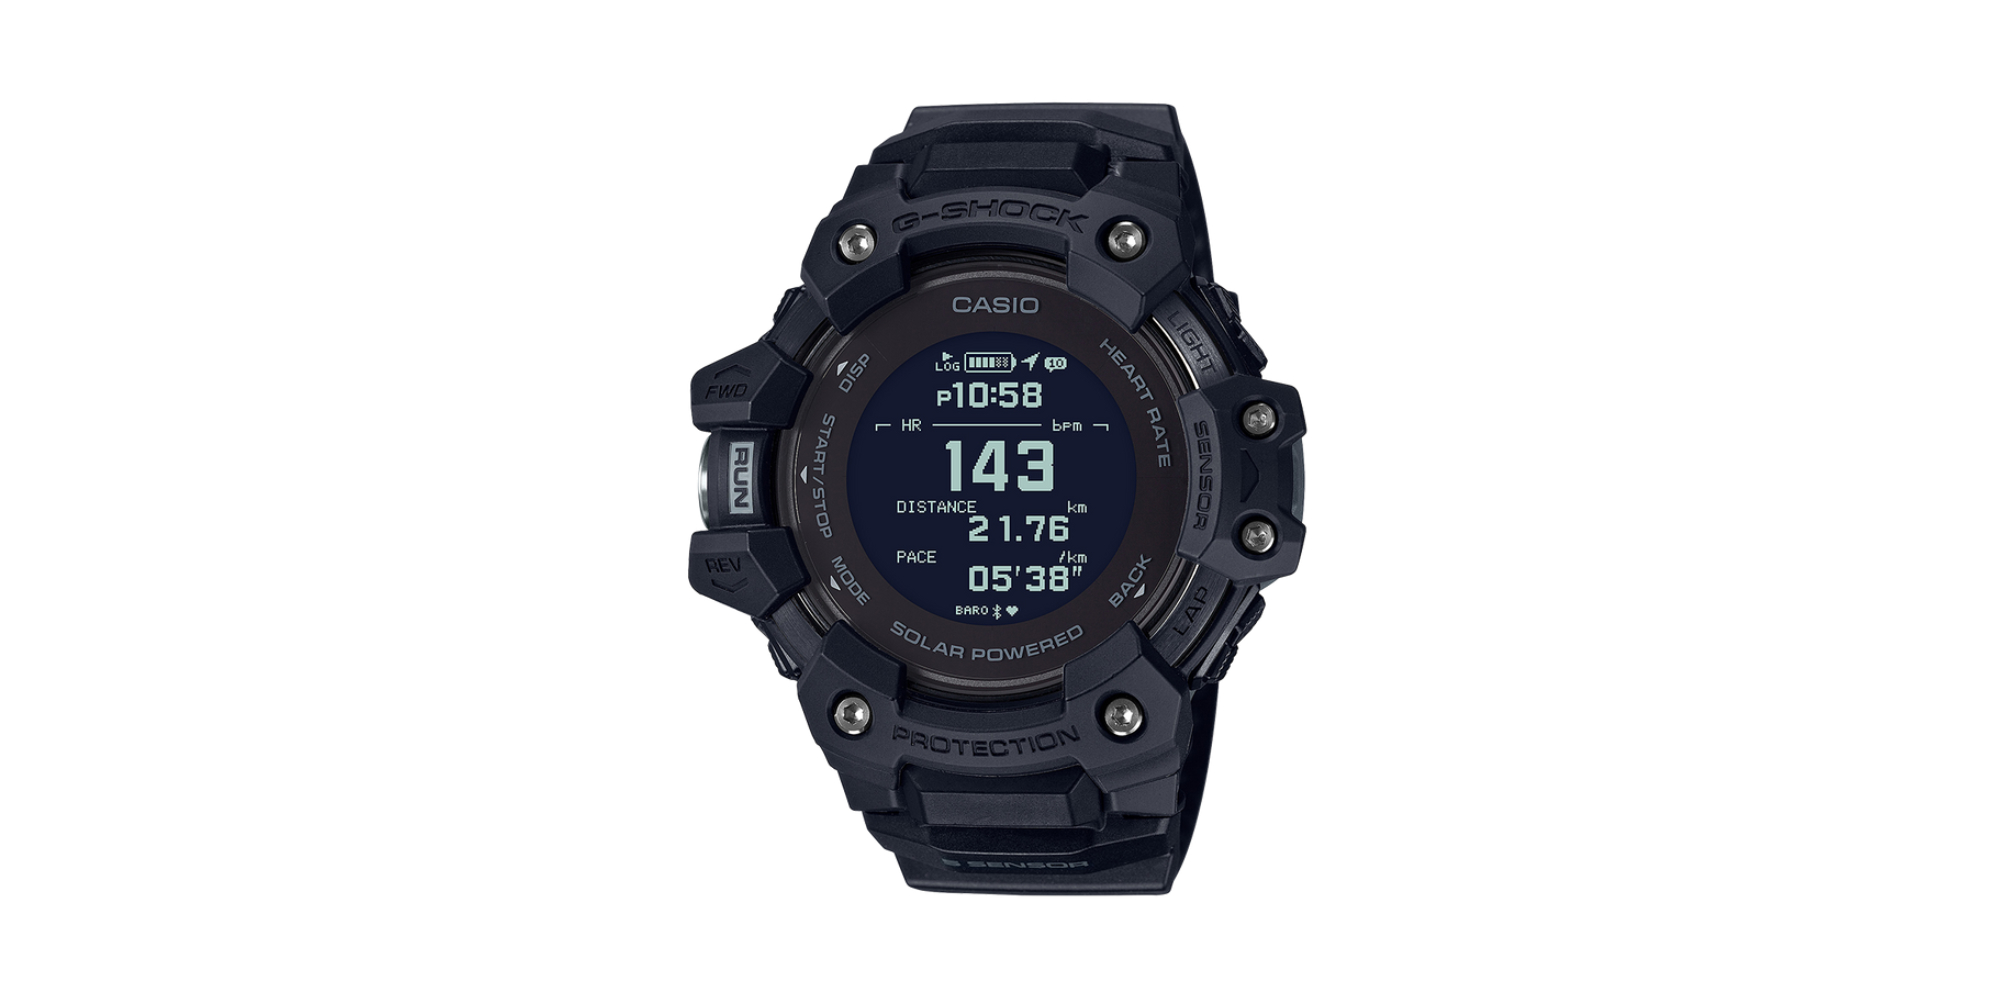 All-new G-SHOCK Move embraces heart rate monitoring, more - 9to5Toys